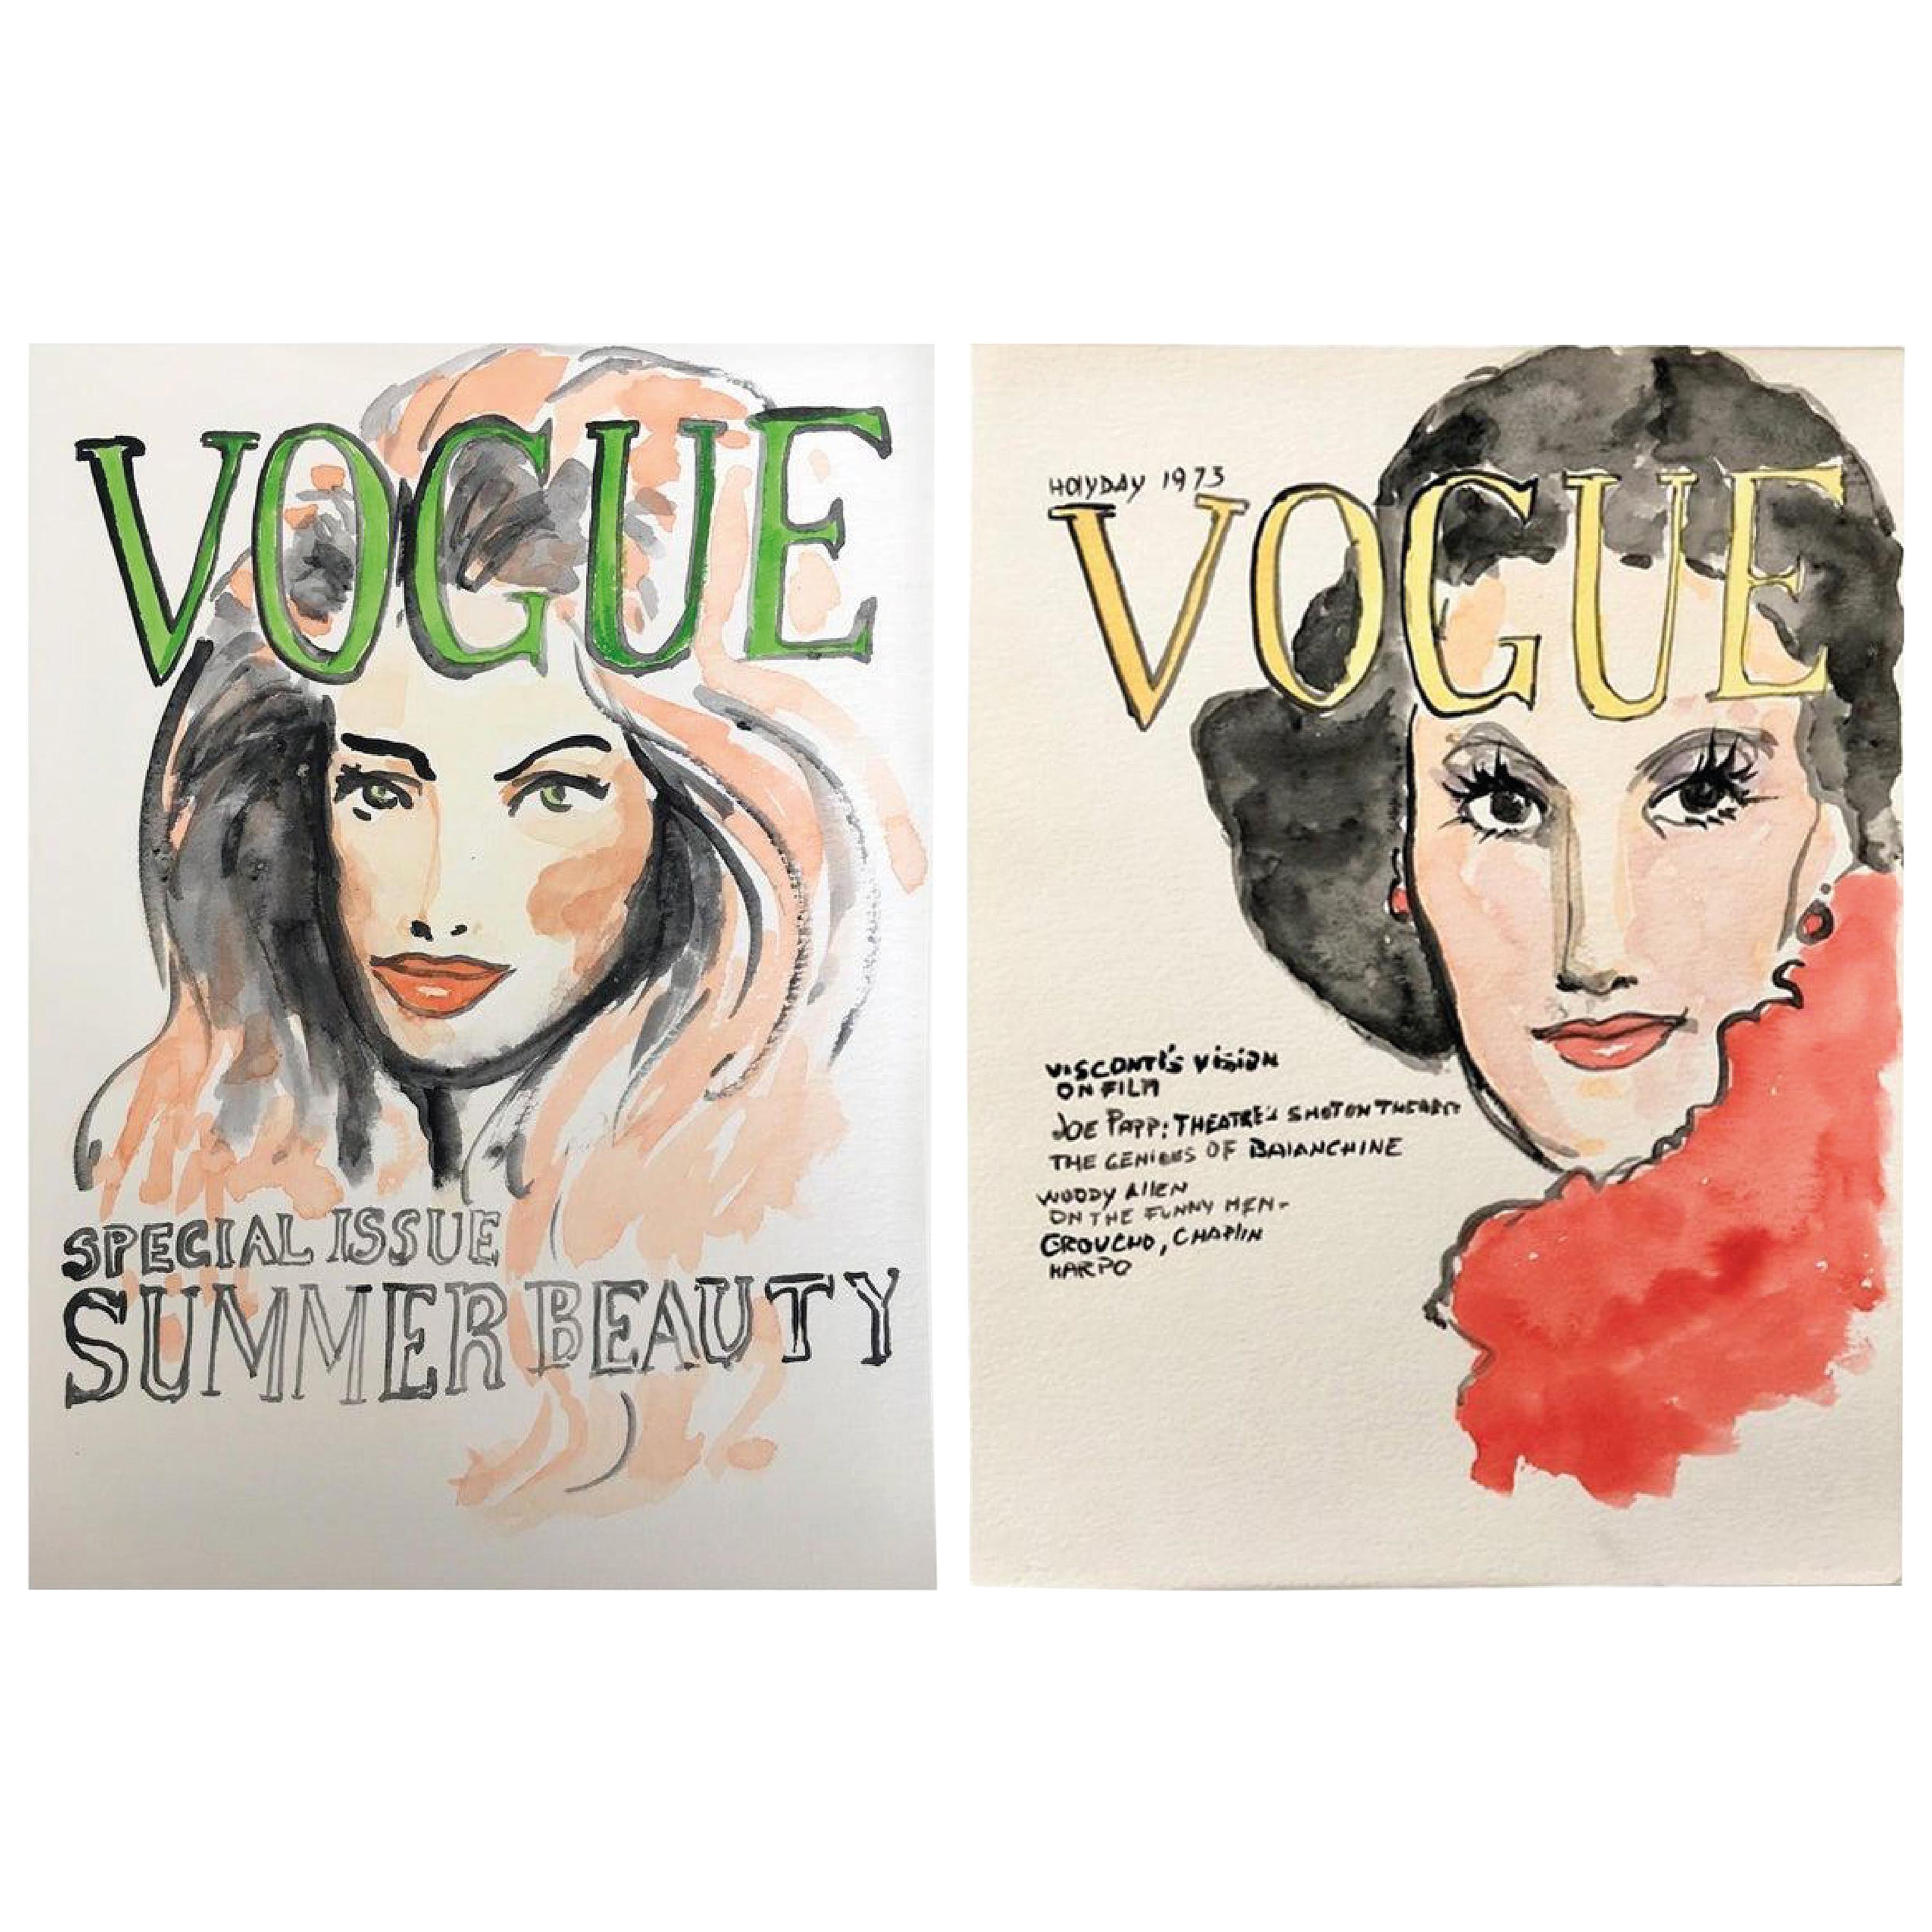 Vogue 3 & Vogue 2,  Fashion Magazine Covers. Watercolors Paintings on Paper For Sale